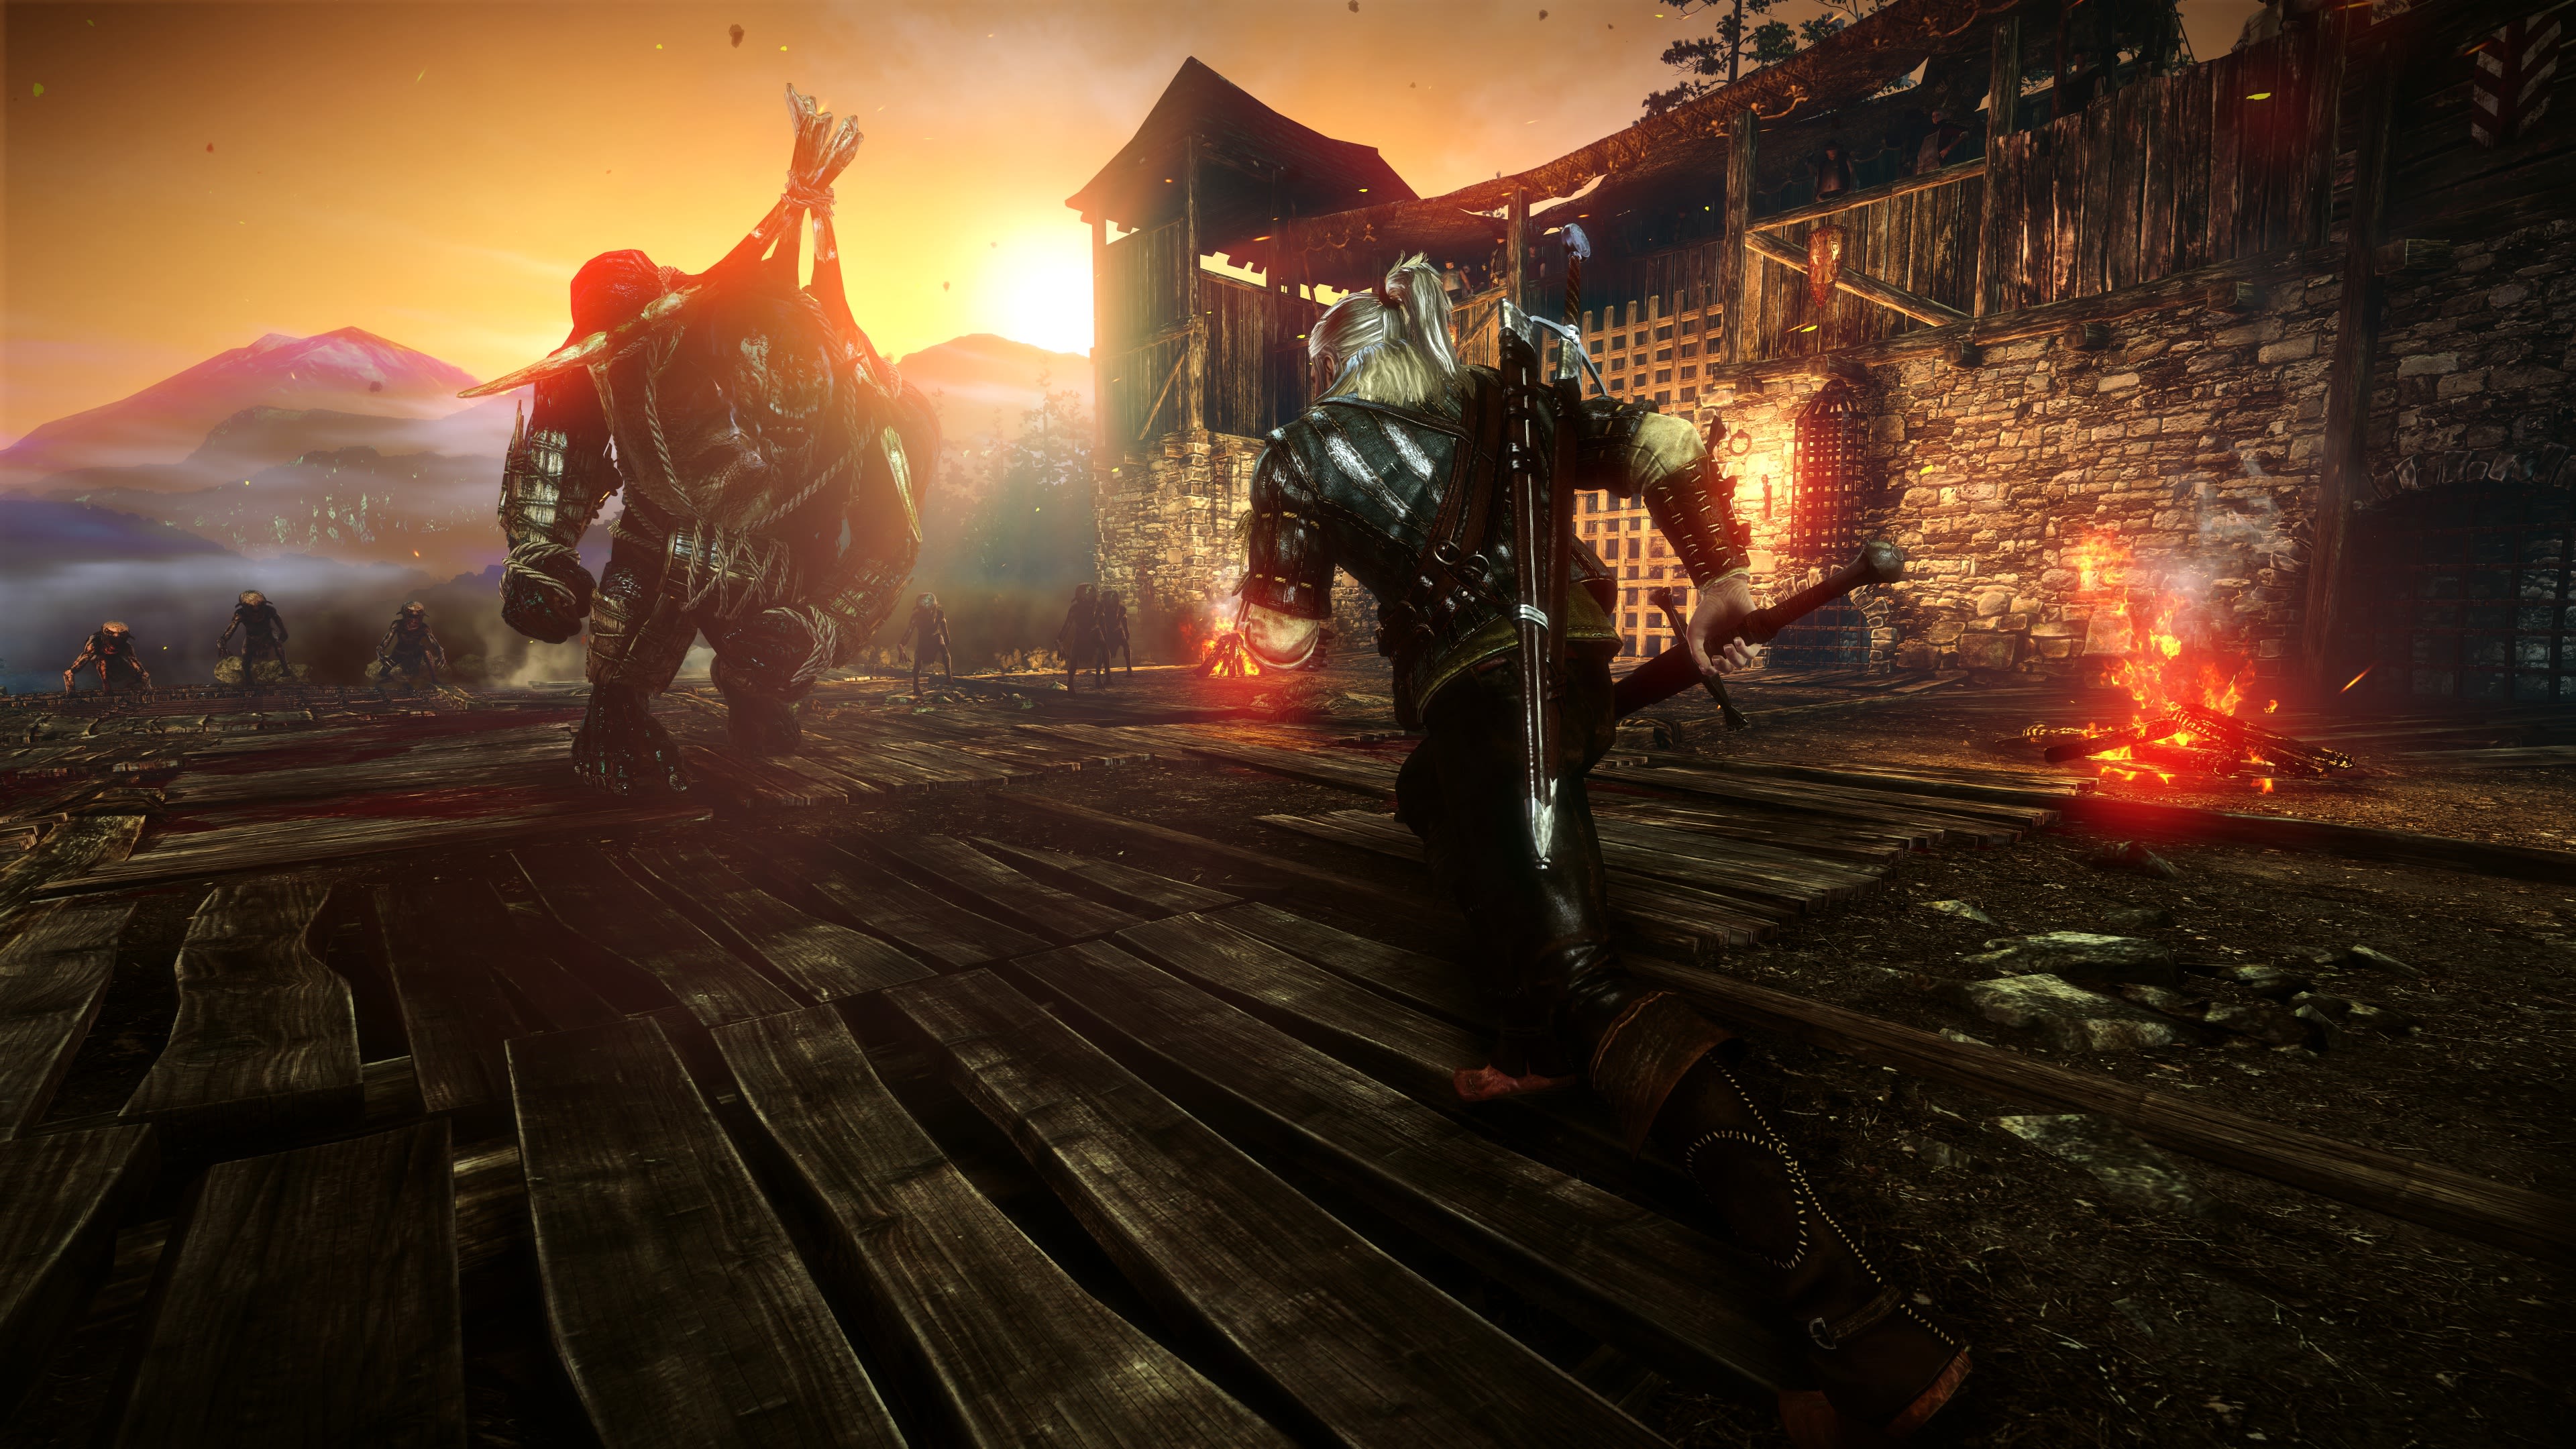 Looking back to 2011 and The Witcher 2: Assassins of Kings